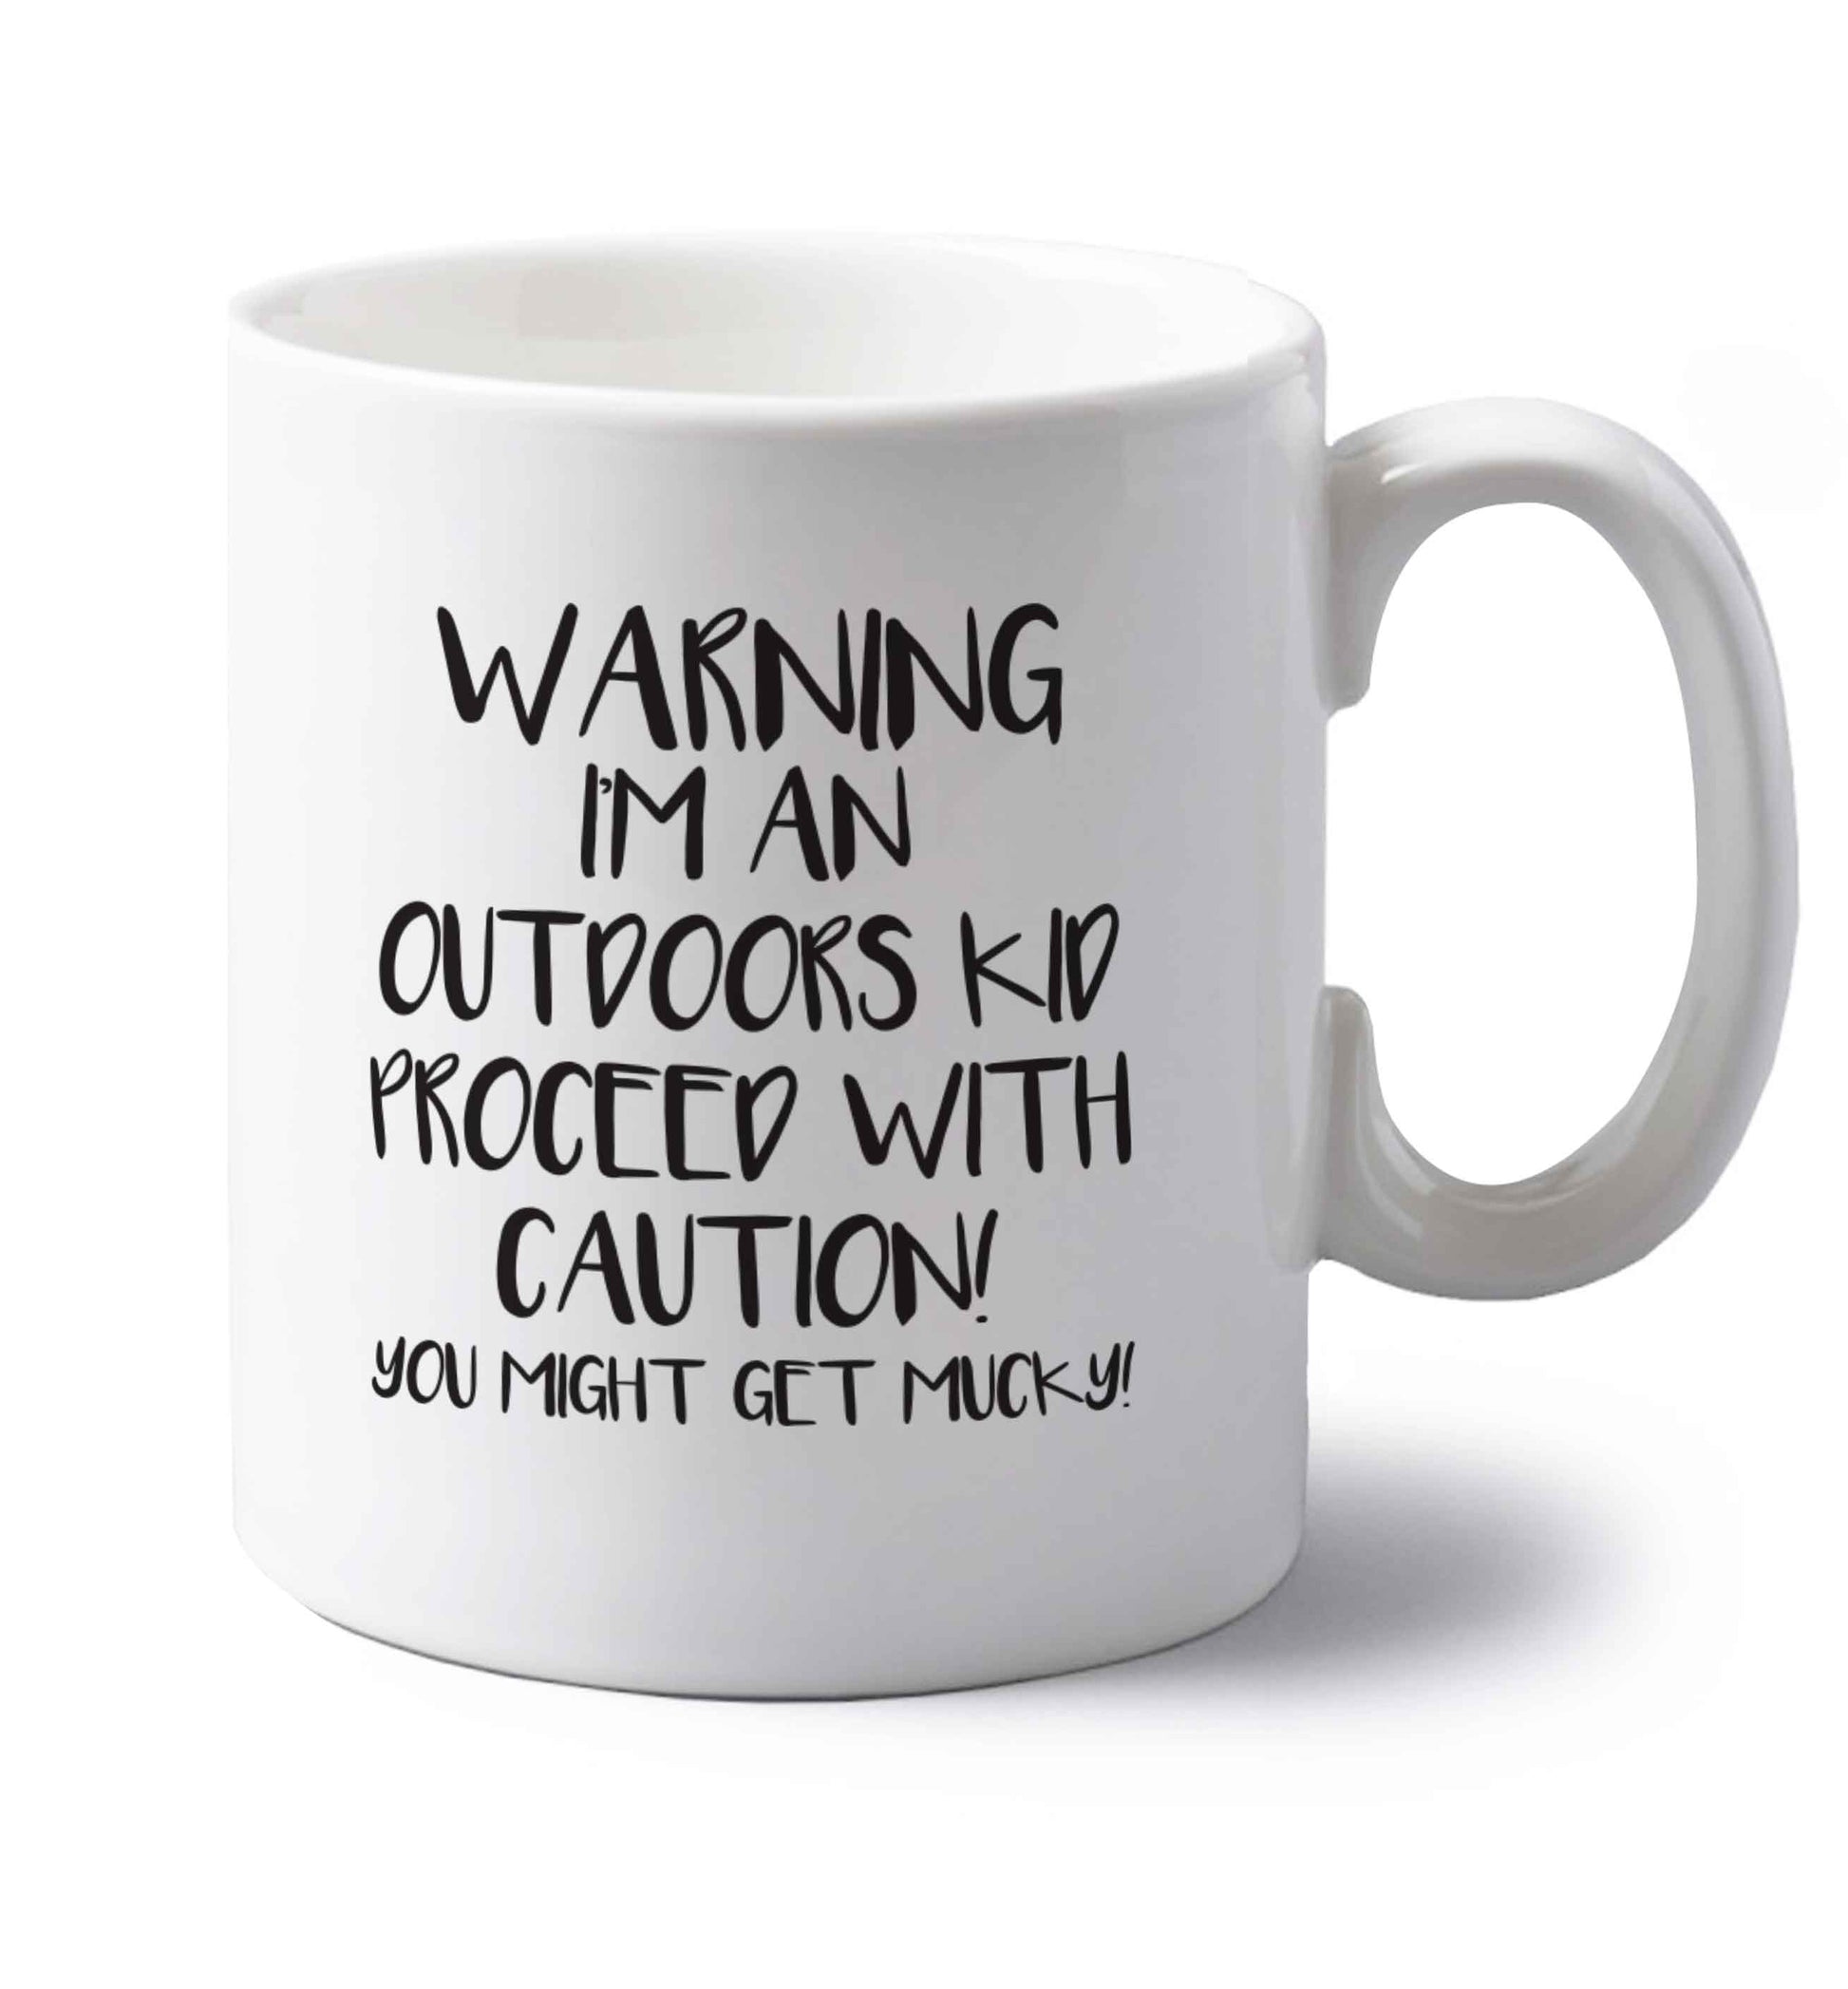 Warning I'm an outdoors kid! Proceed with caution you might get mucky left handed white ceramic mug 